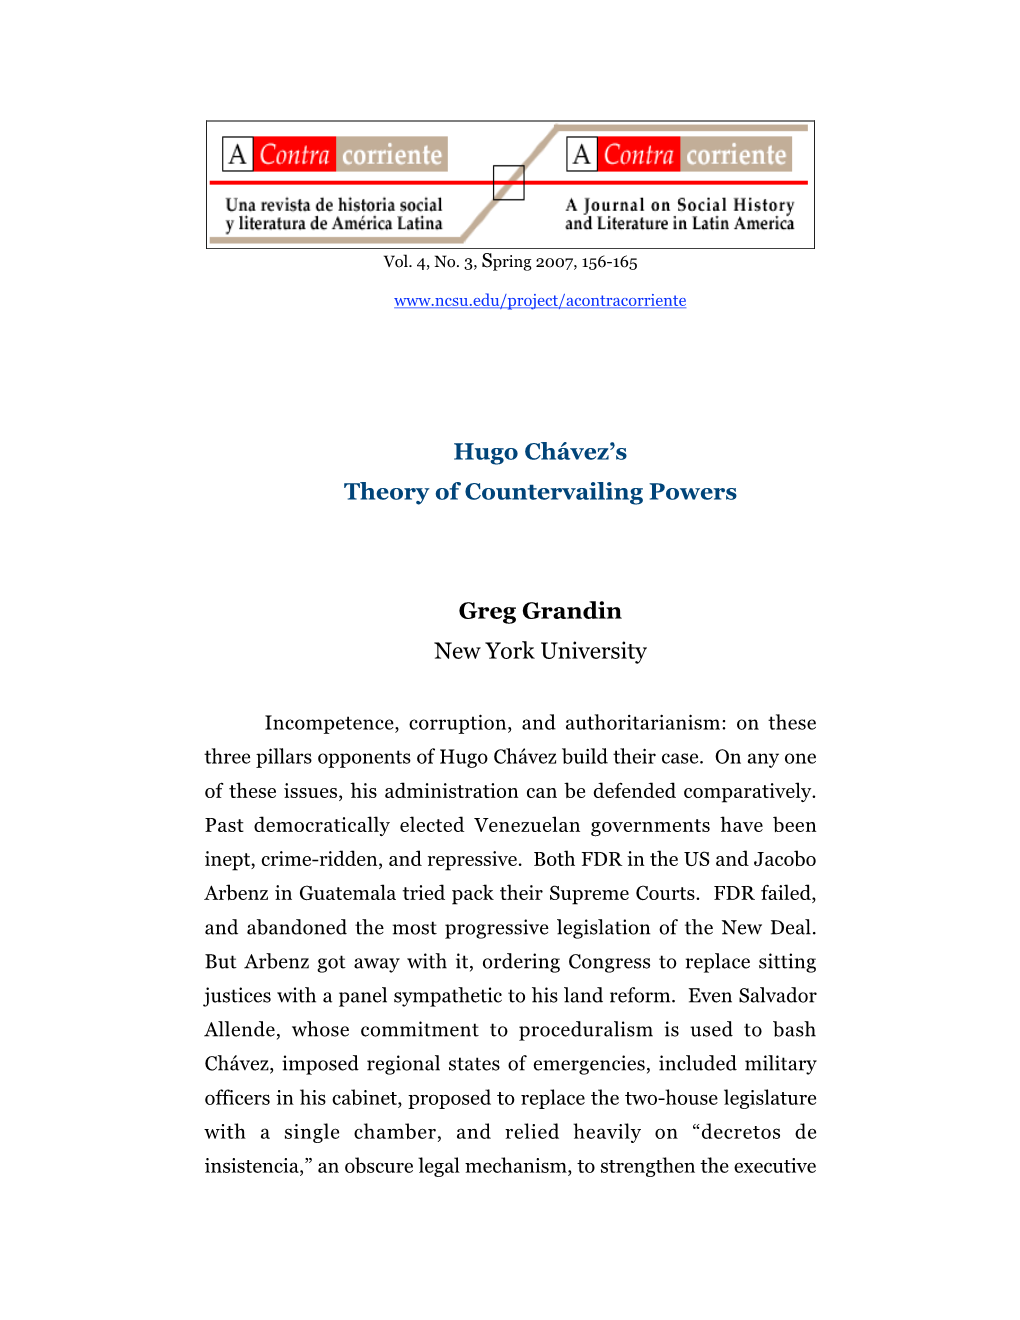 Hugo Chávez's Theory of Countervailing Powers Greg